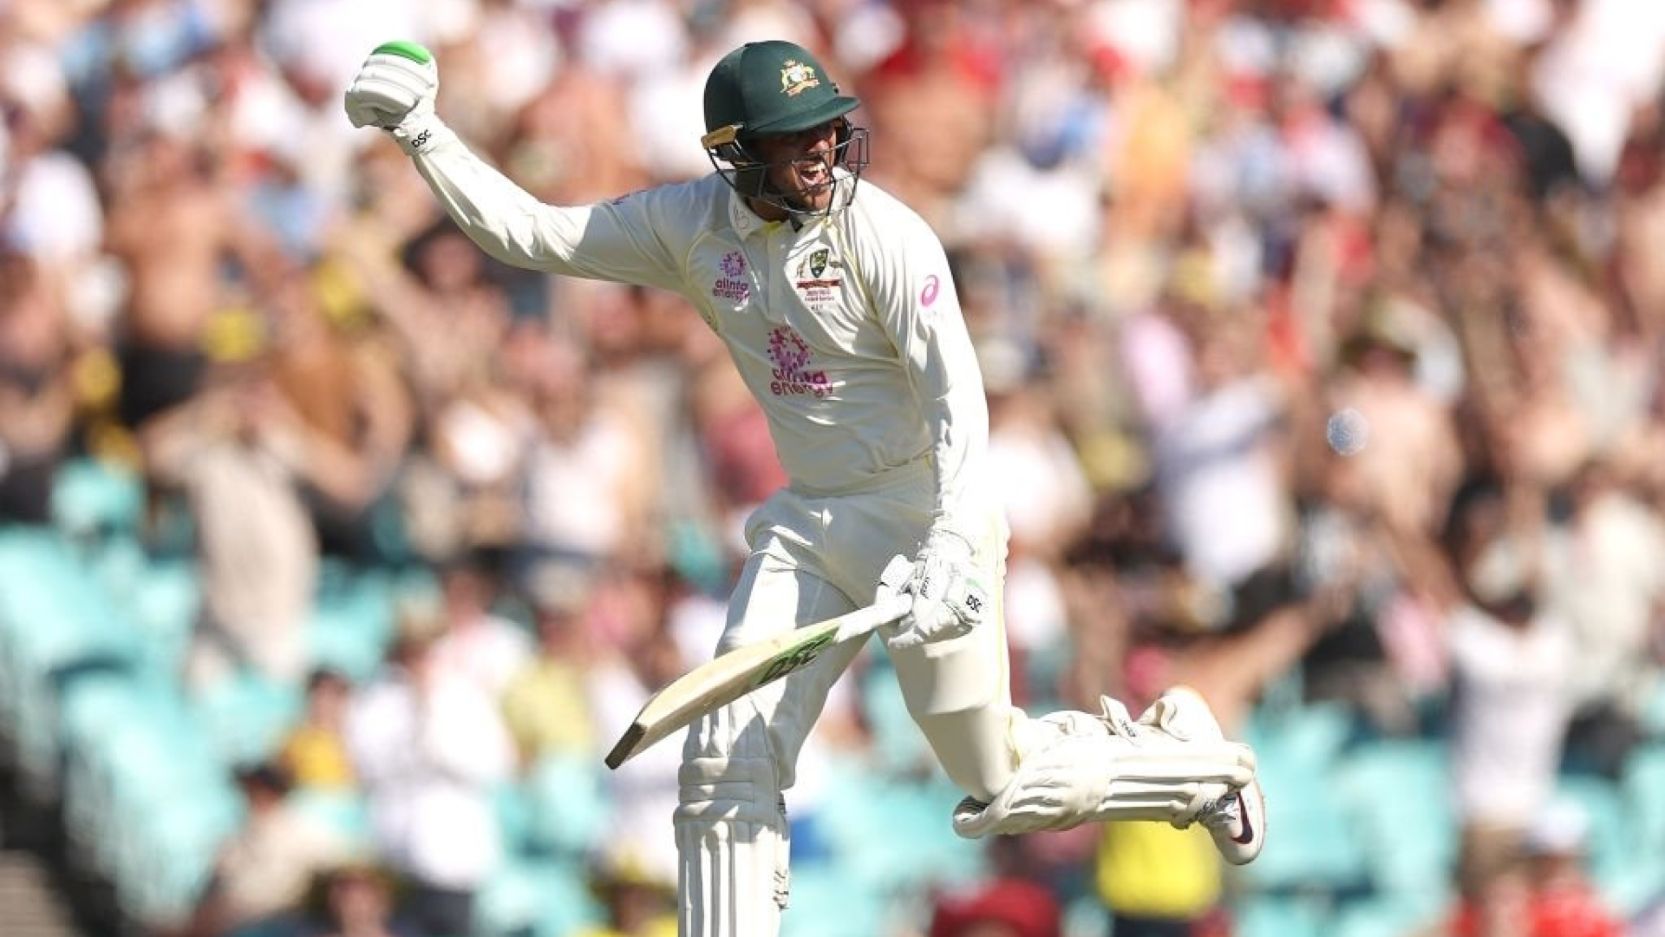 The Ashes | Cummins not in favour of dropping Khawaja, says he can bat anywhere from 1-6